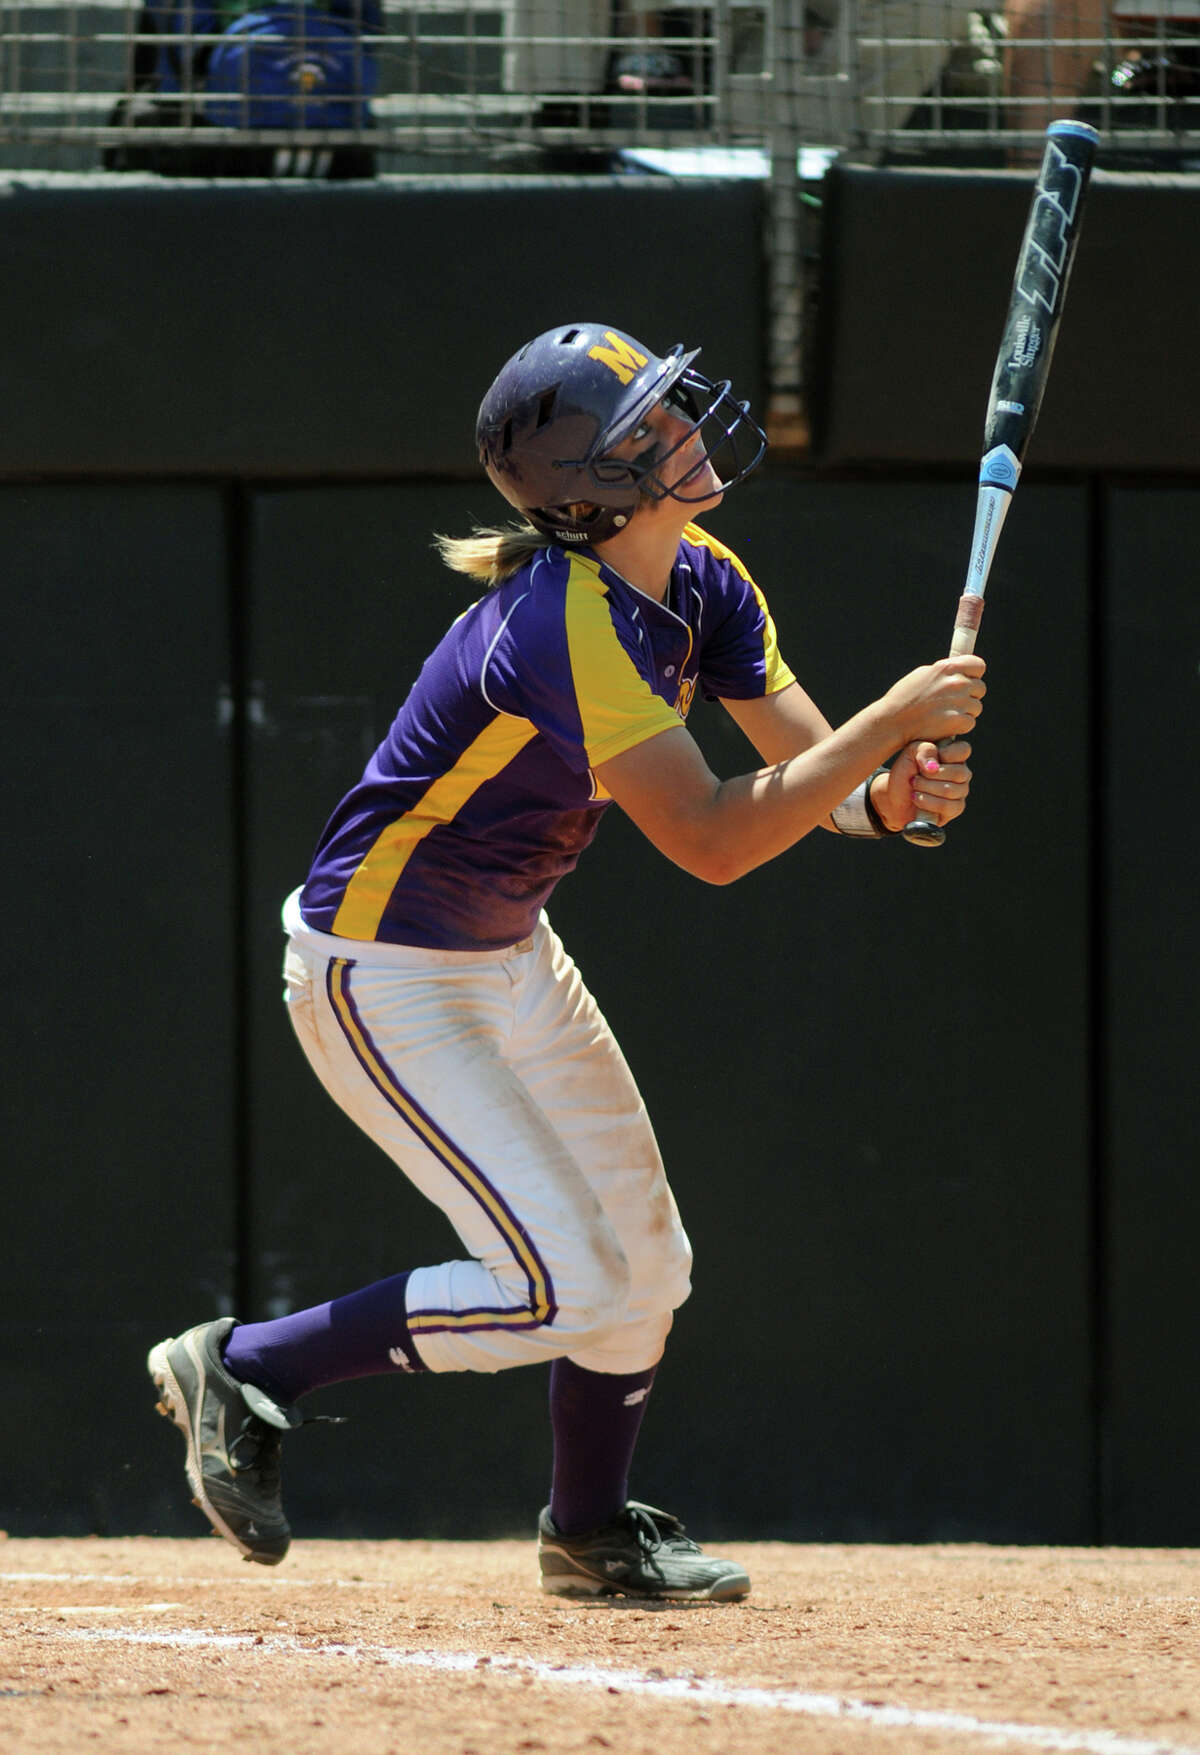 Montgomery sophomore third baseman Malloree Schurr follows her drive during her at-bat in the bottom of the 2nd inning against Smithson Valley during their 4A state softball final at Red & Charline McCombs Field in Austin on Saturday.